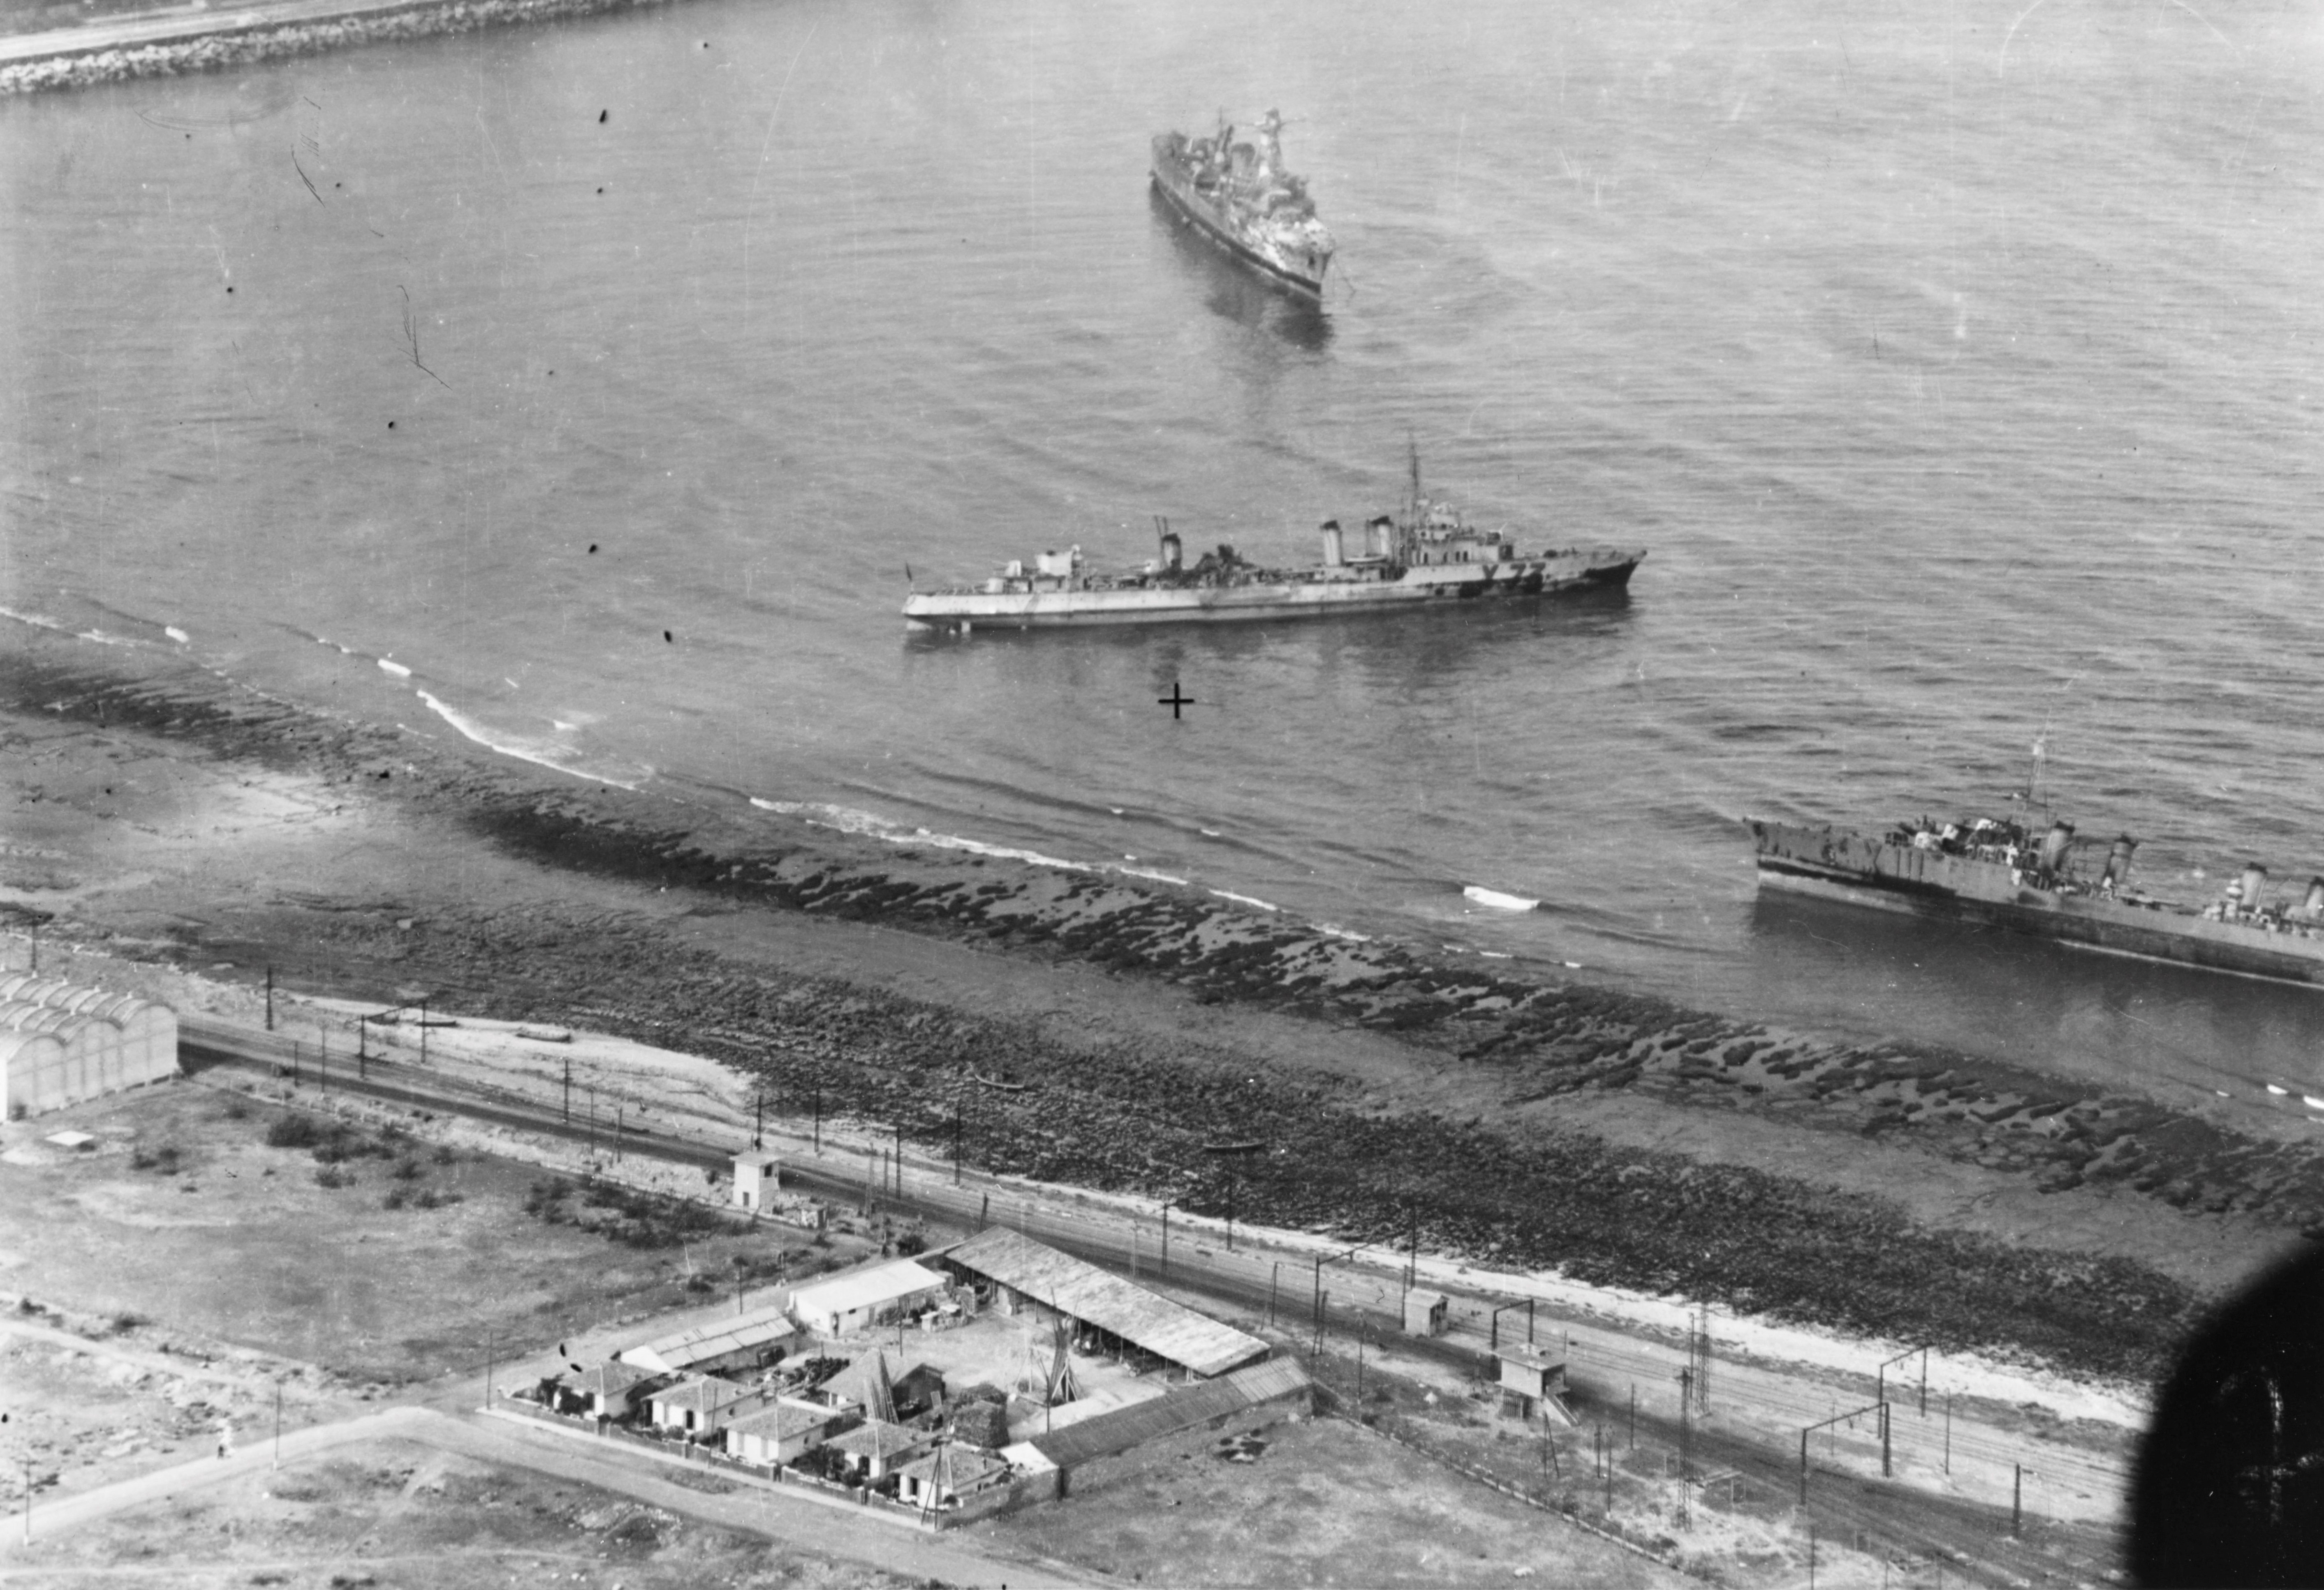 Aerial photograph from a USS Ranger plane showing three badly damaged French warships beached at Casablanca, French Morocco, 11 Nov 1942. They were damaged in the Battle of Casablanca 8 Nov 1942